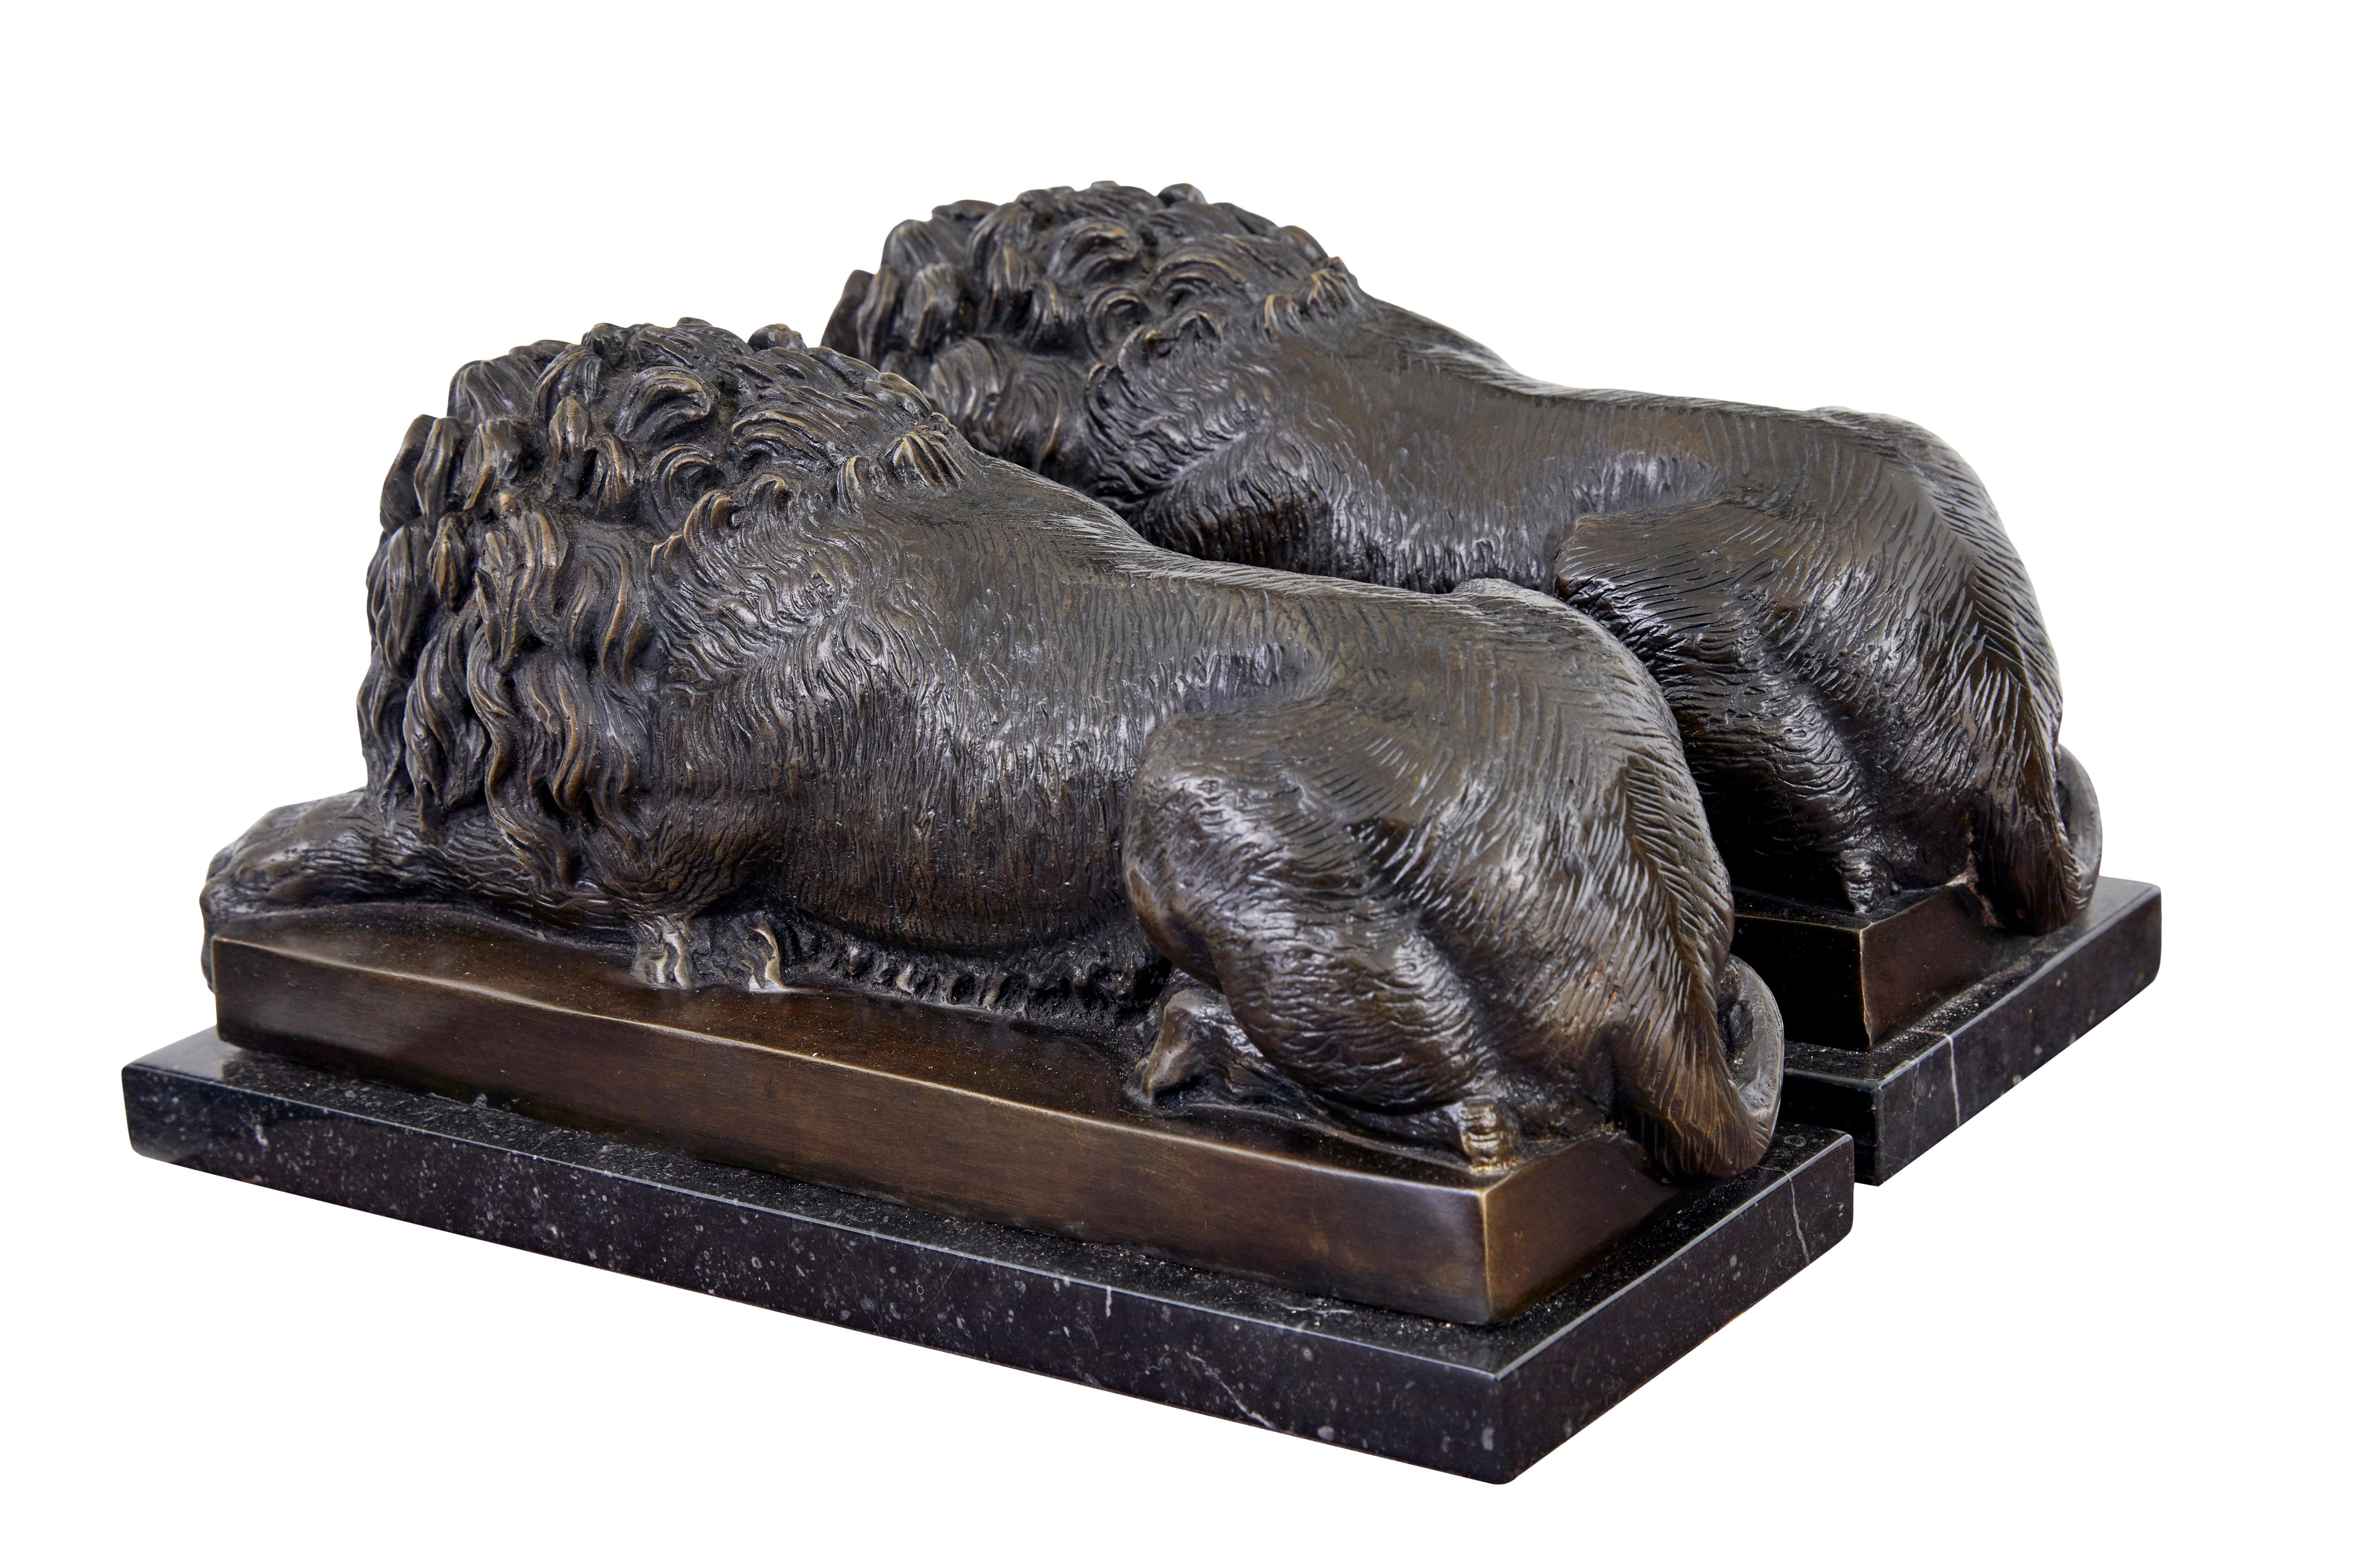 English Pair of bronze and marble lion book ends